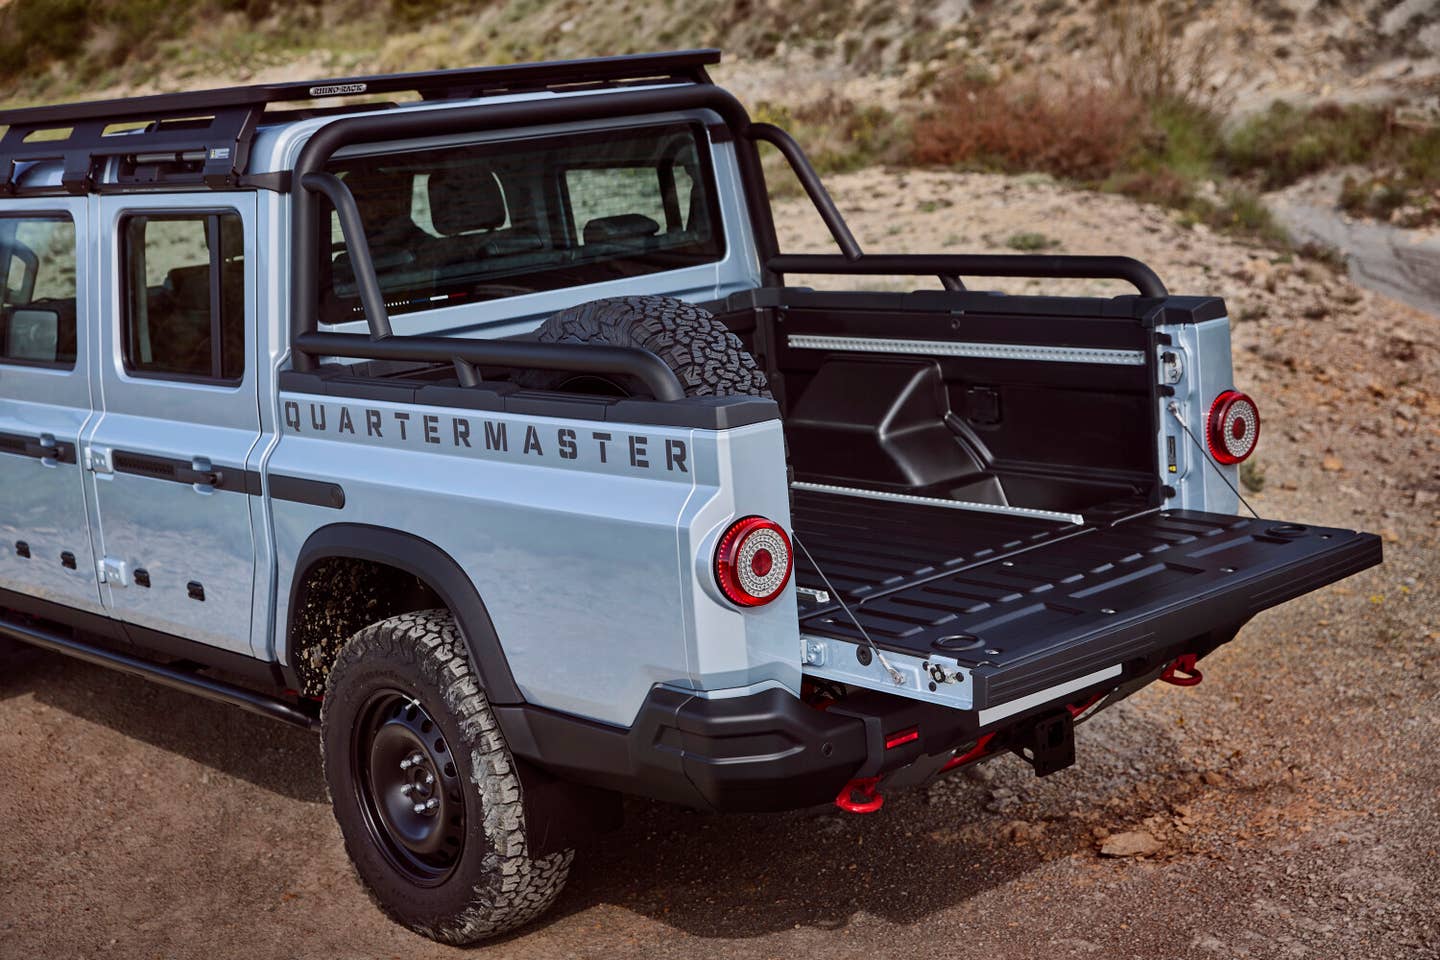 The Ineos Grenadier Quartermaster Is A European Take On a Proper Pickup Truck